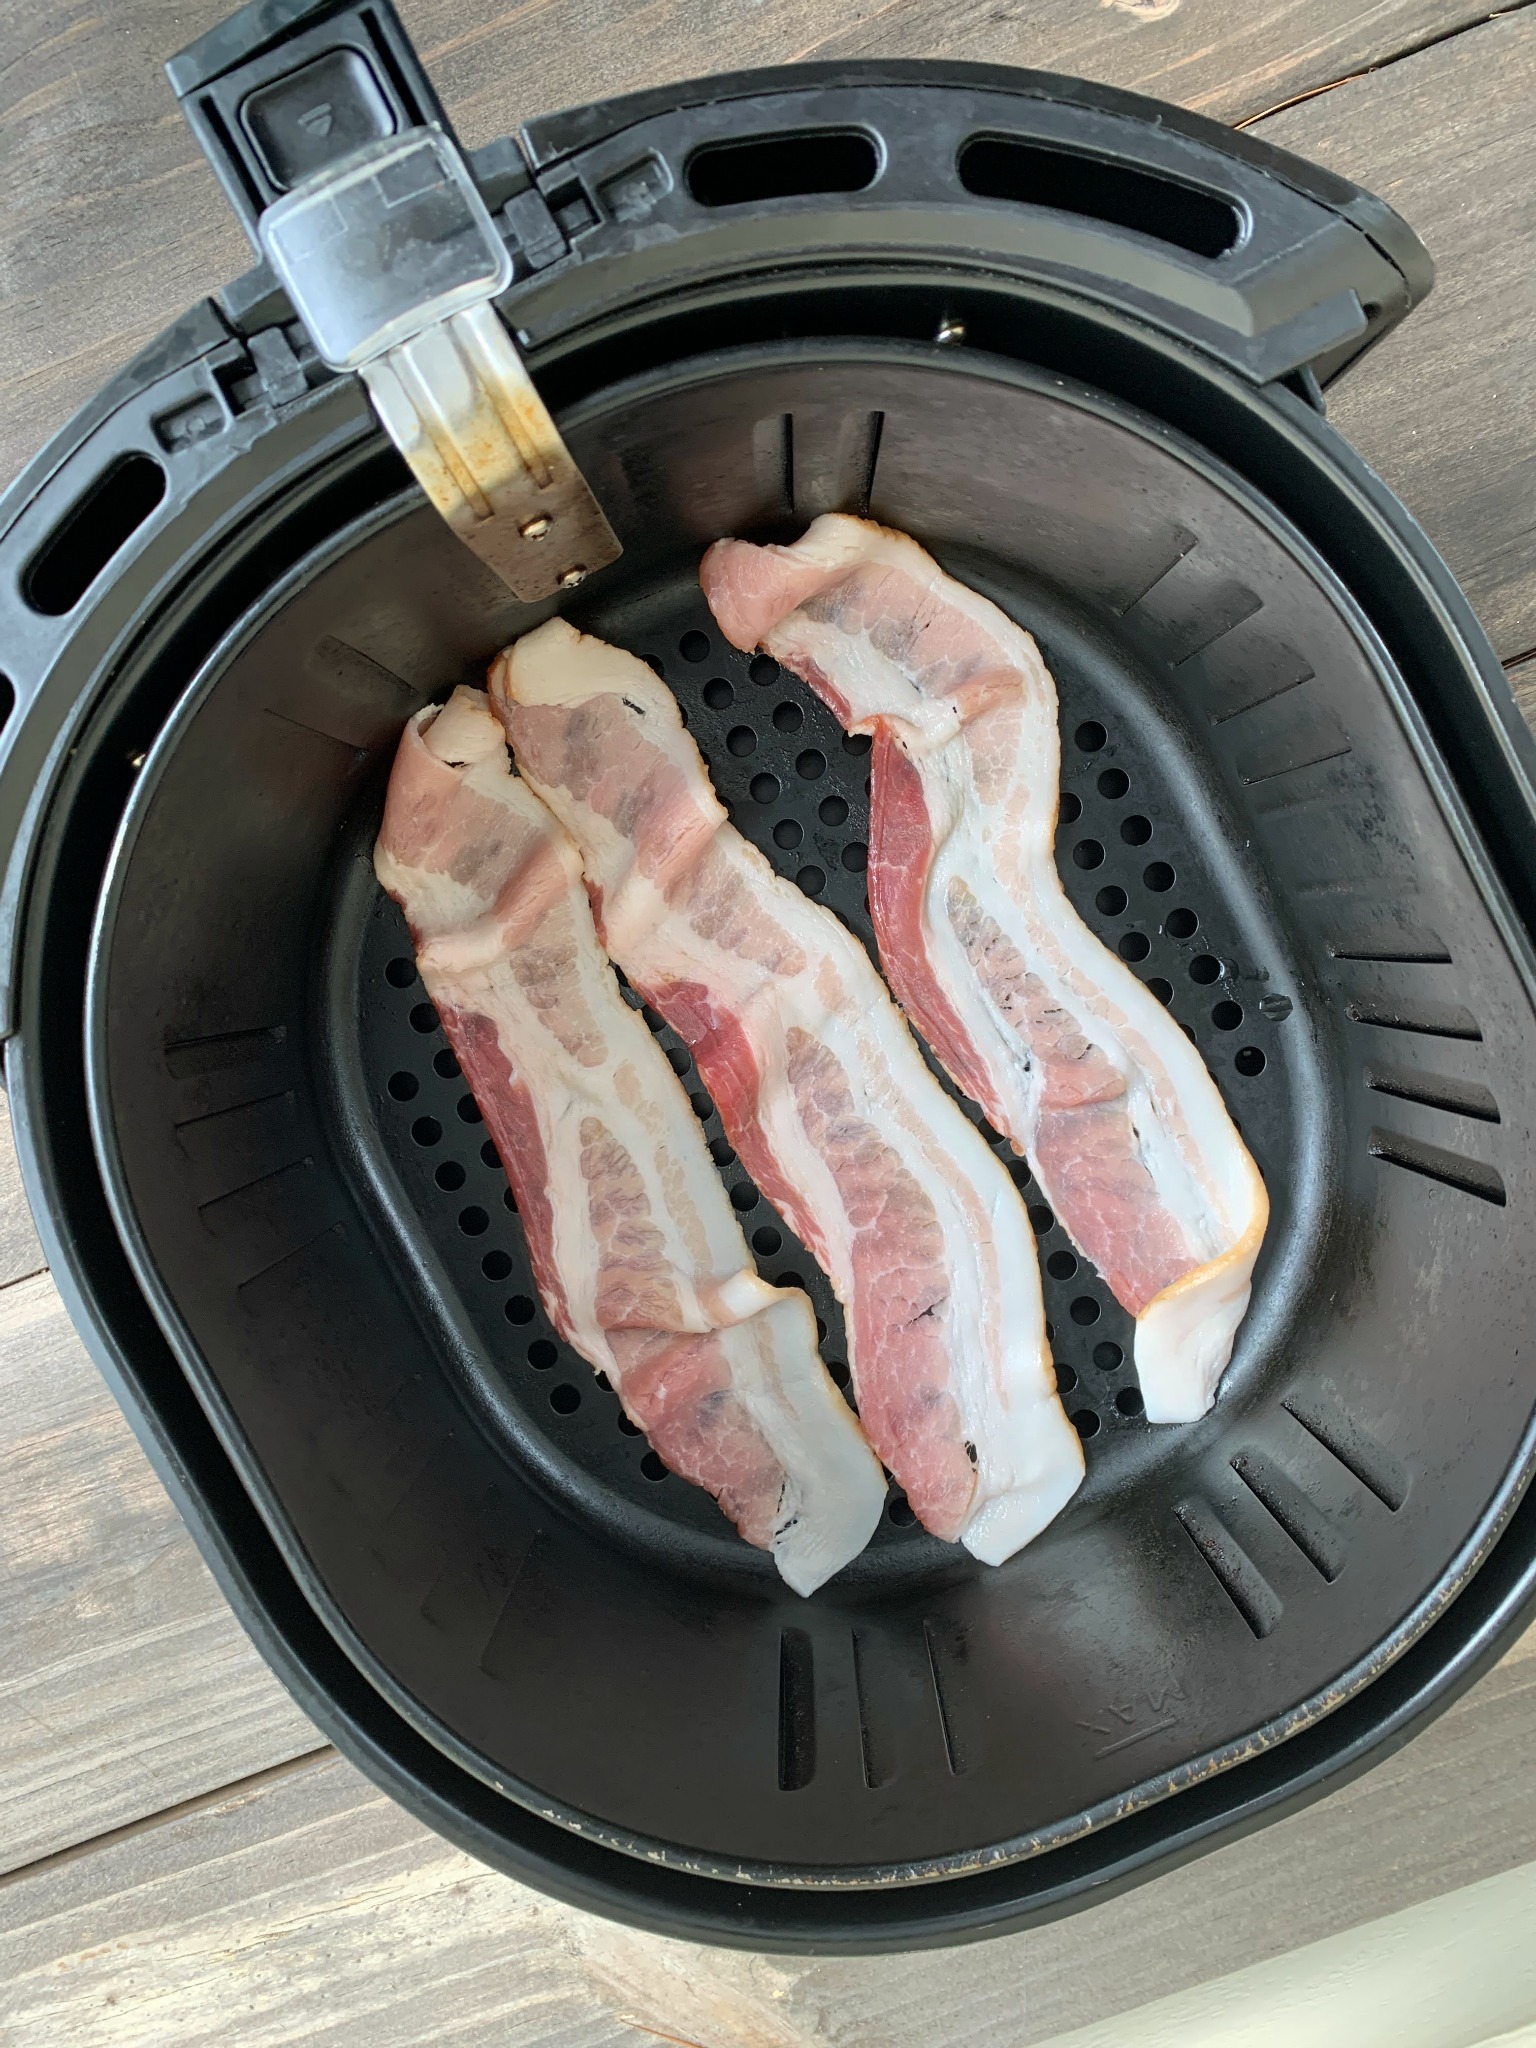 3 raw bacon slices in an air fryer basket